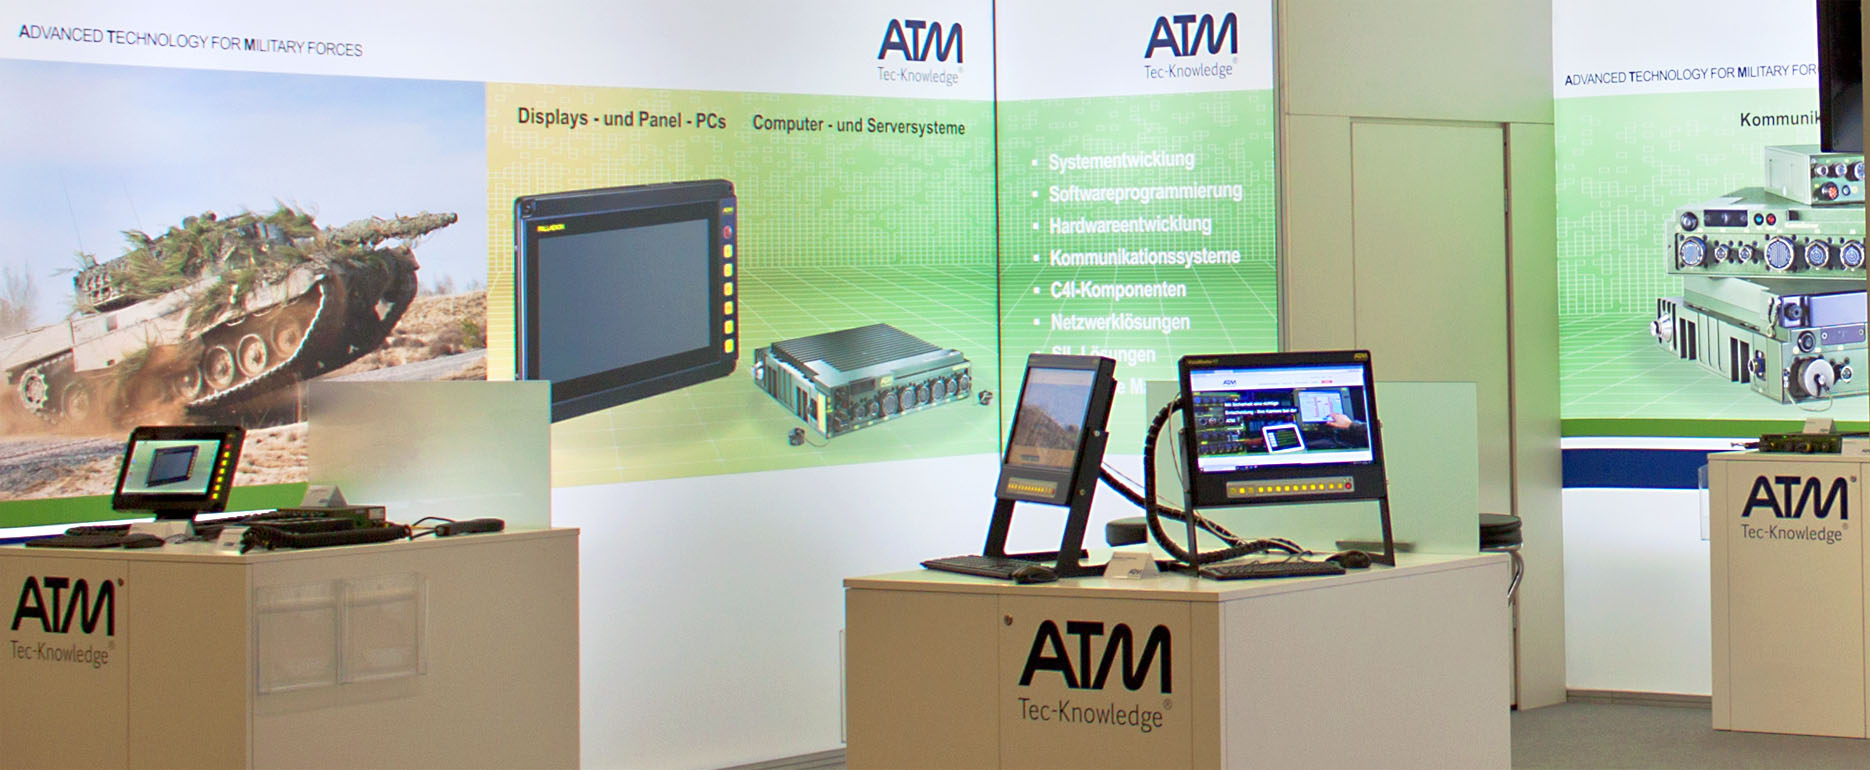 ATM’s stand at the AFCEA trade exhibition